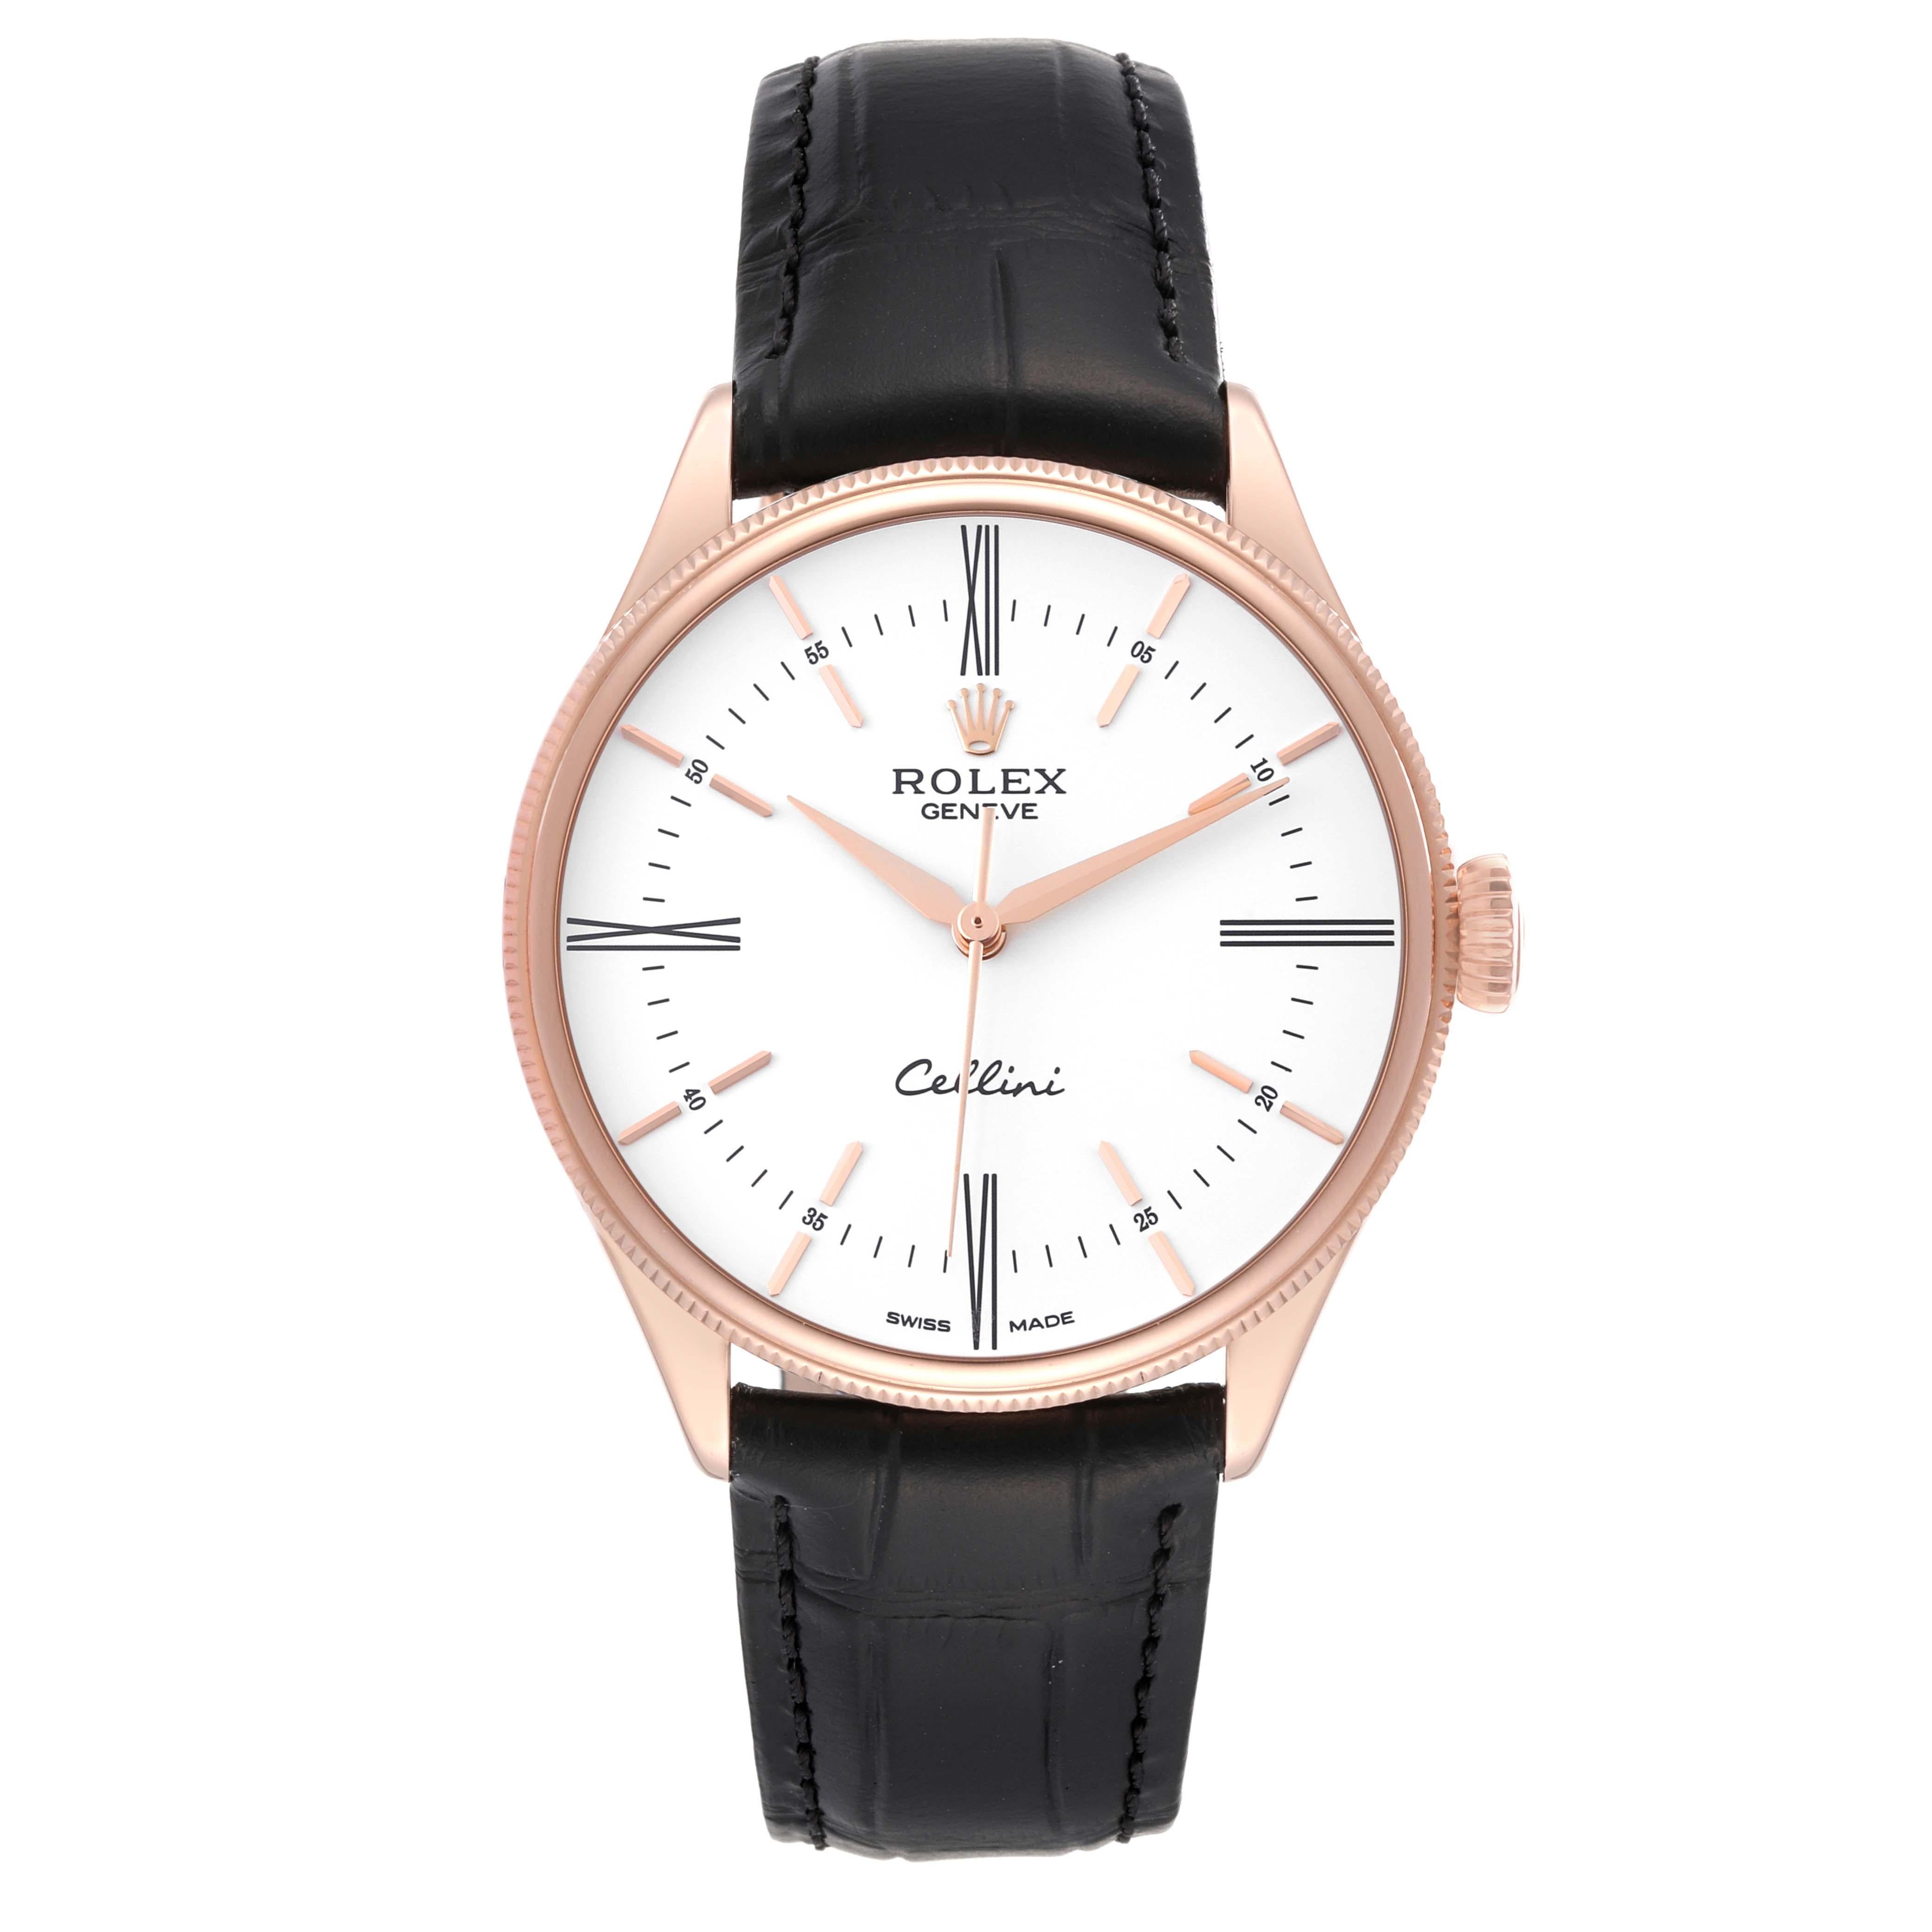 Men's Rolex Cellini Time White Dial Rose Gold Mens Watch 50505 For Sale